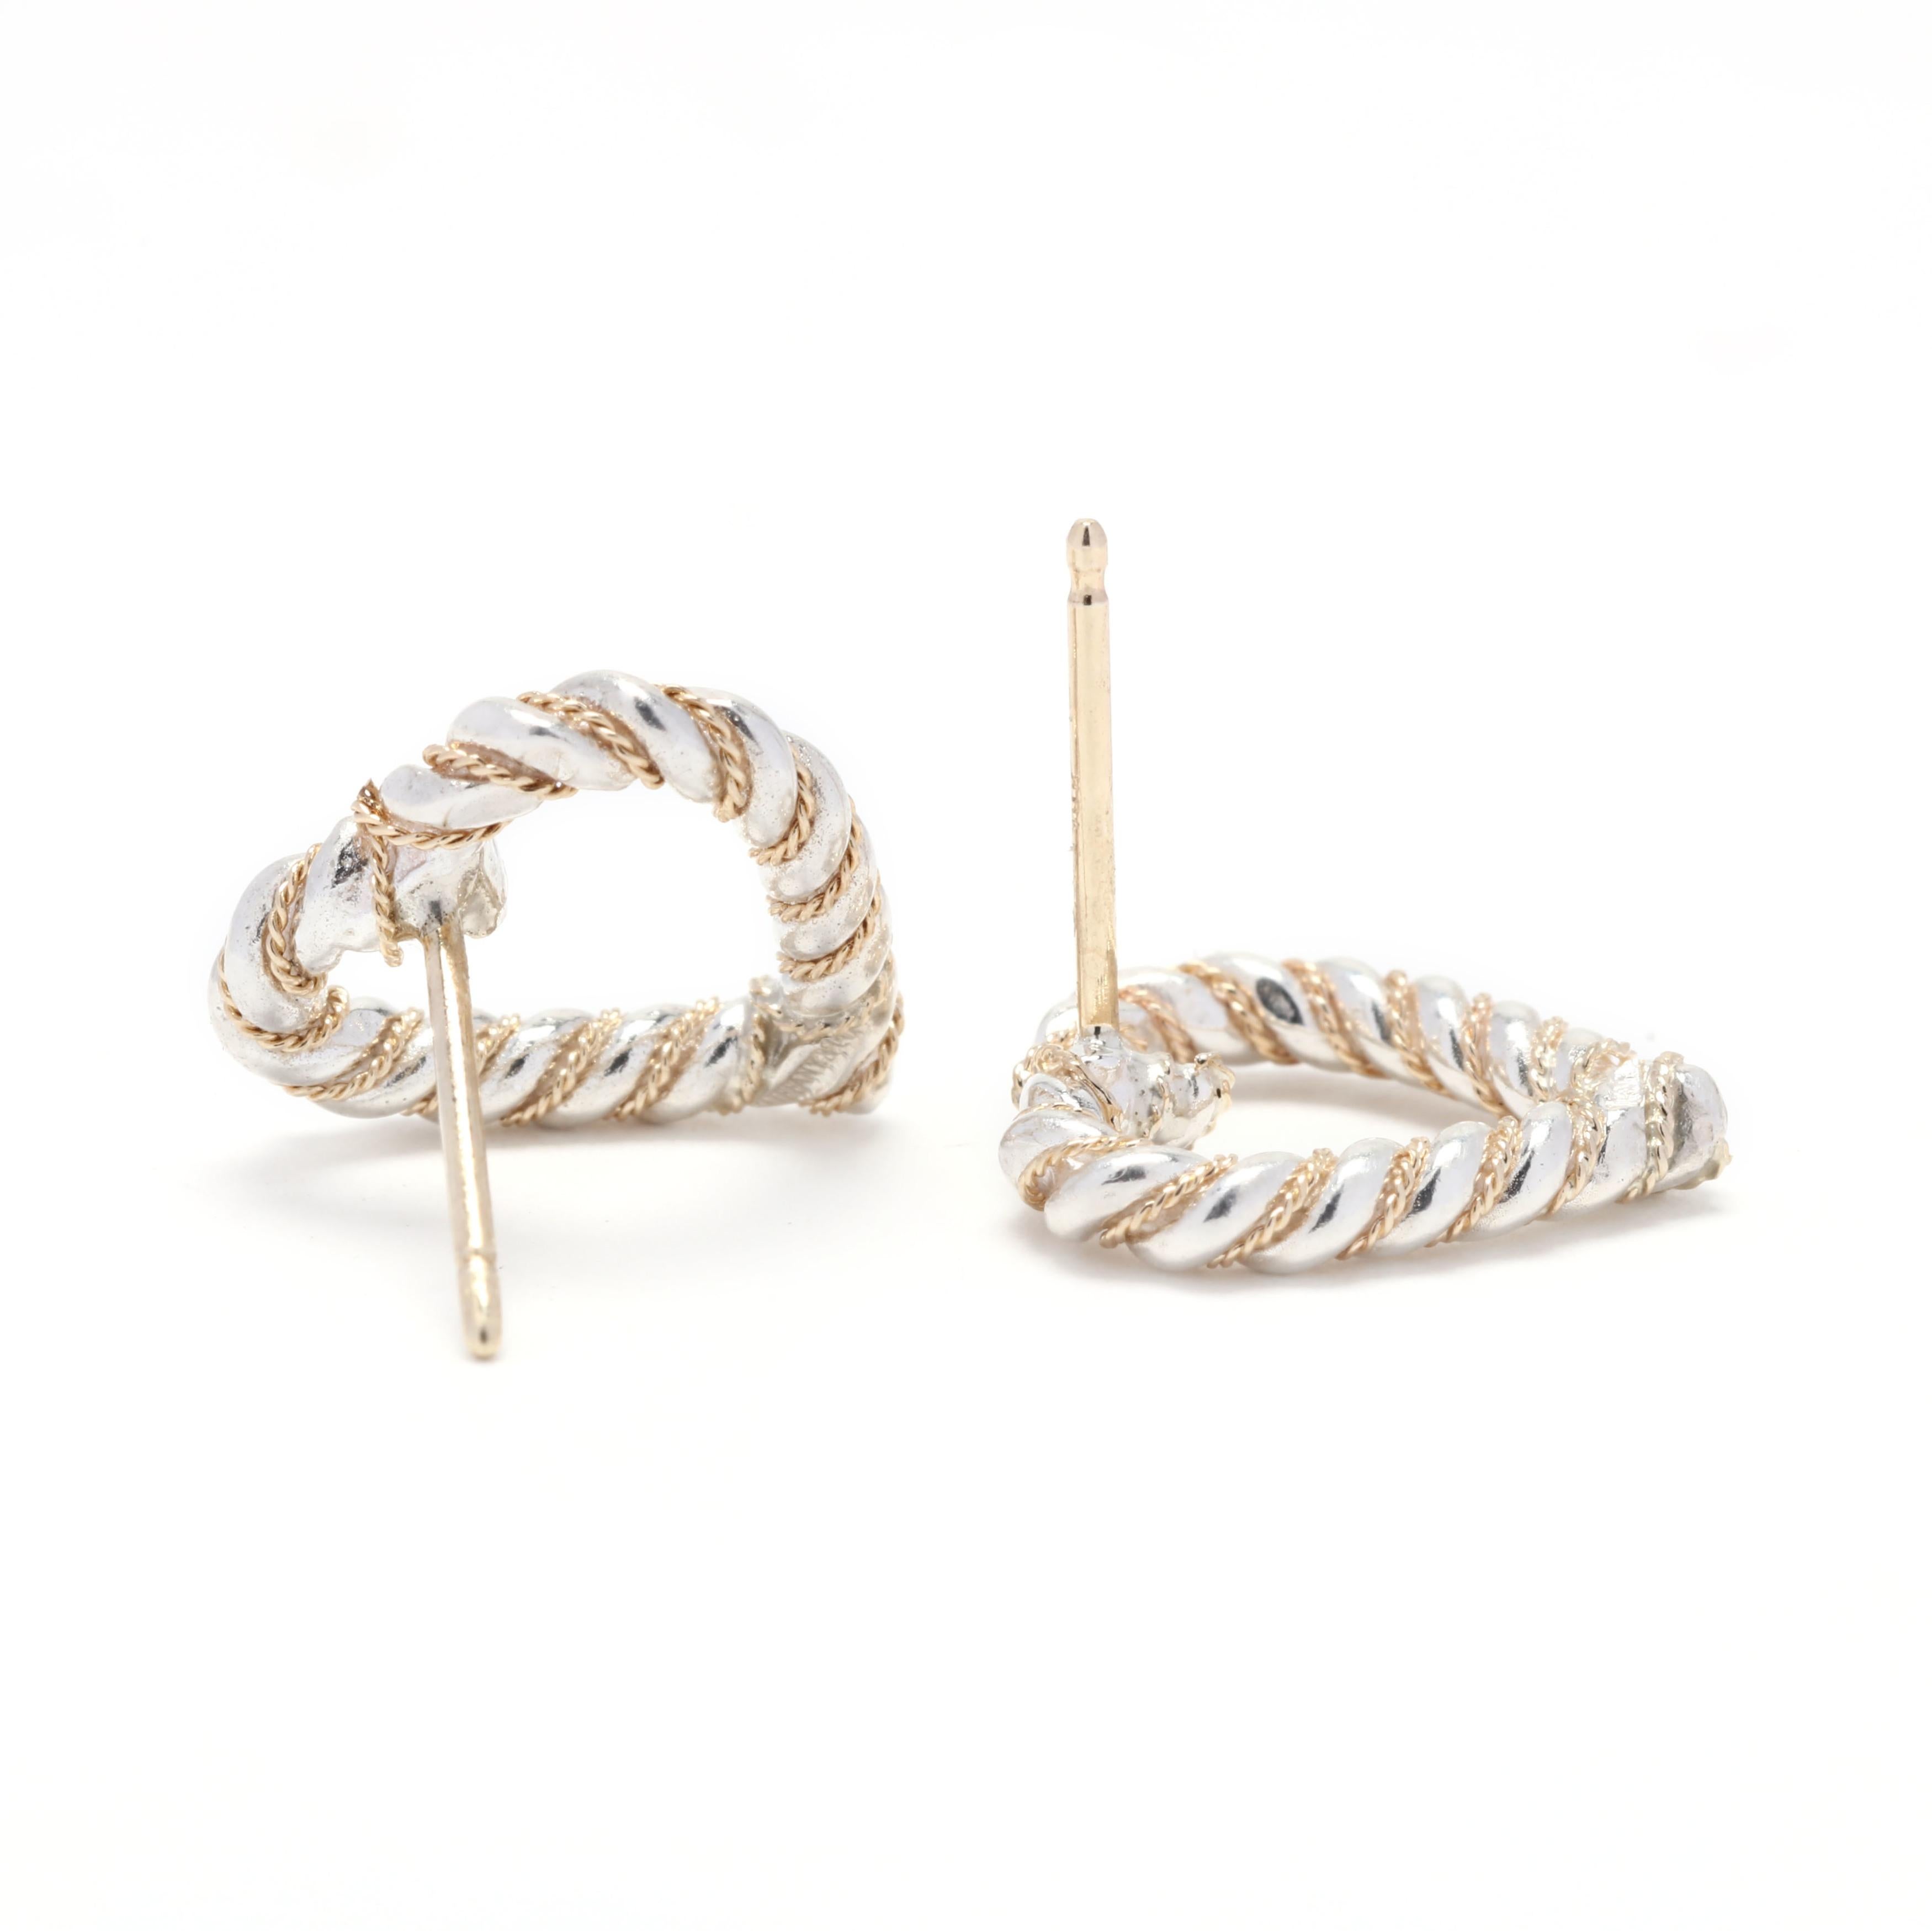 A pair of Tiffany and Company 18 karat yellow gold and sterling silver open heart rope stud earrings. These earrings feature an open heart design in a rope motif border and with pierced push backs. Please note that these earrings have replacement